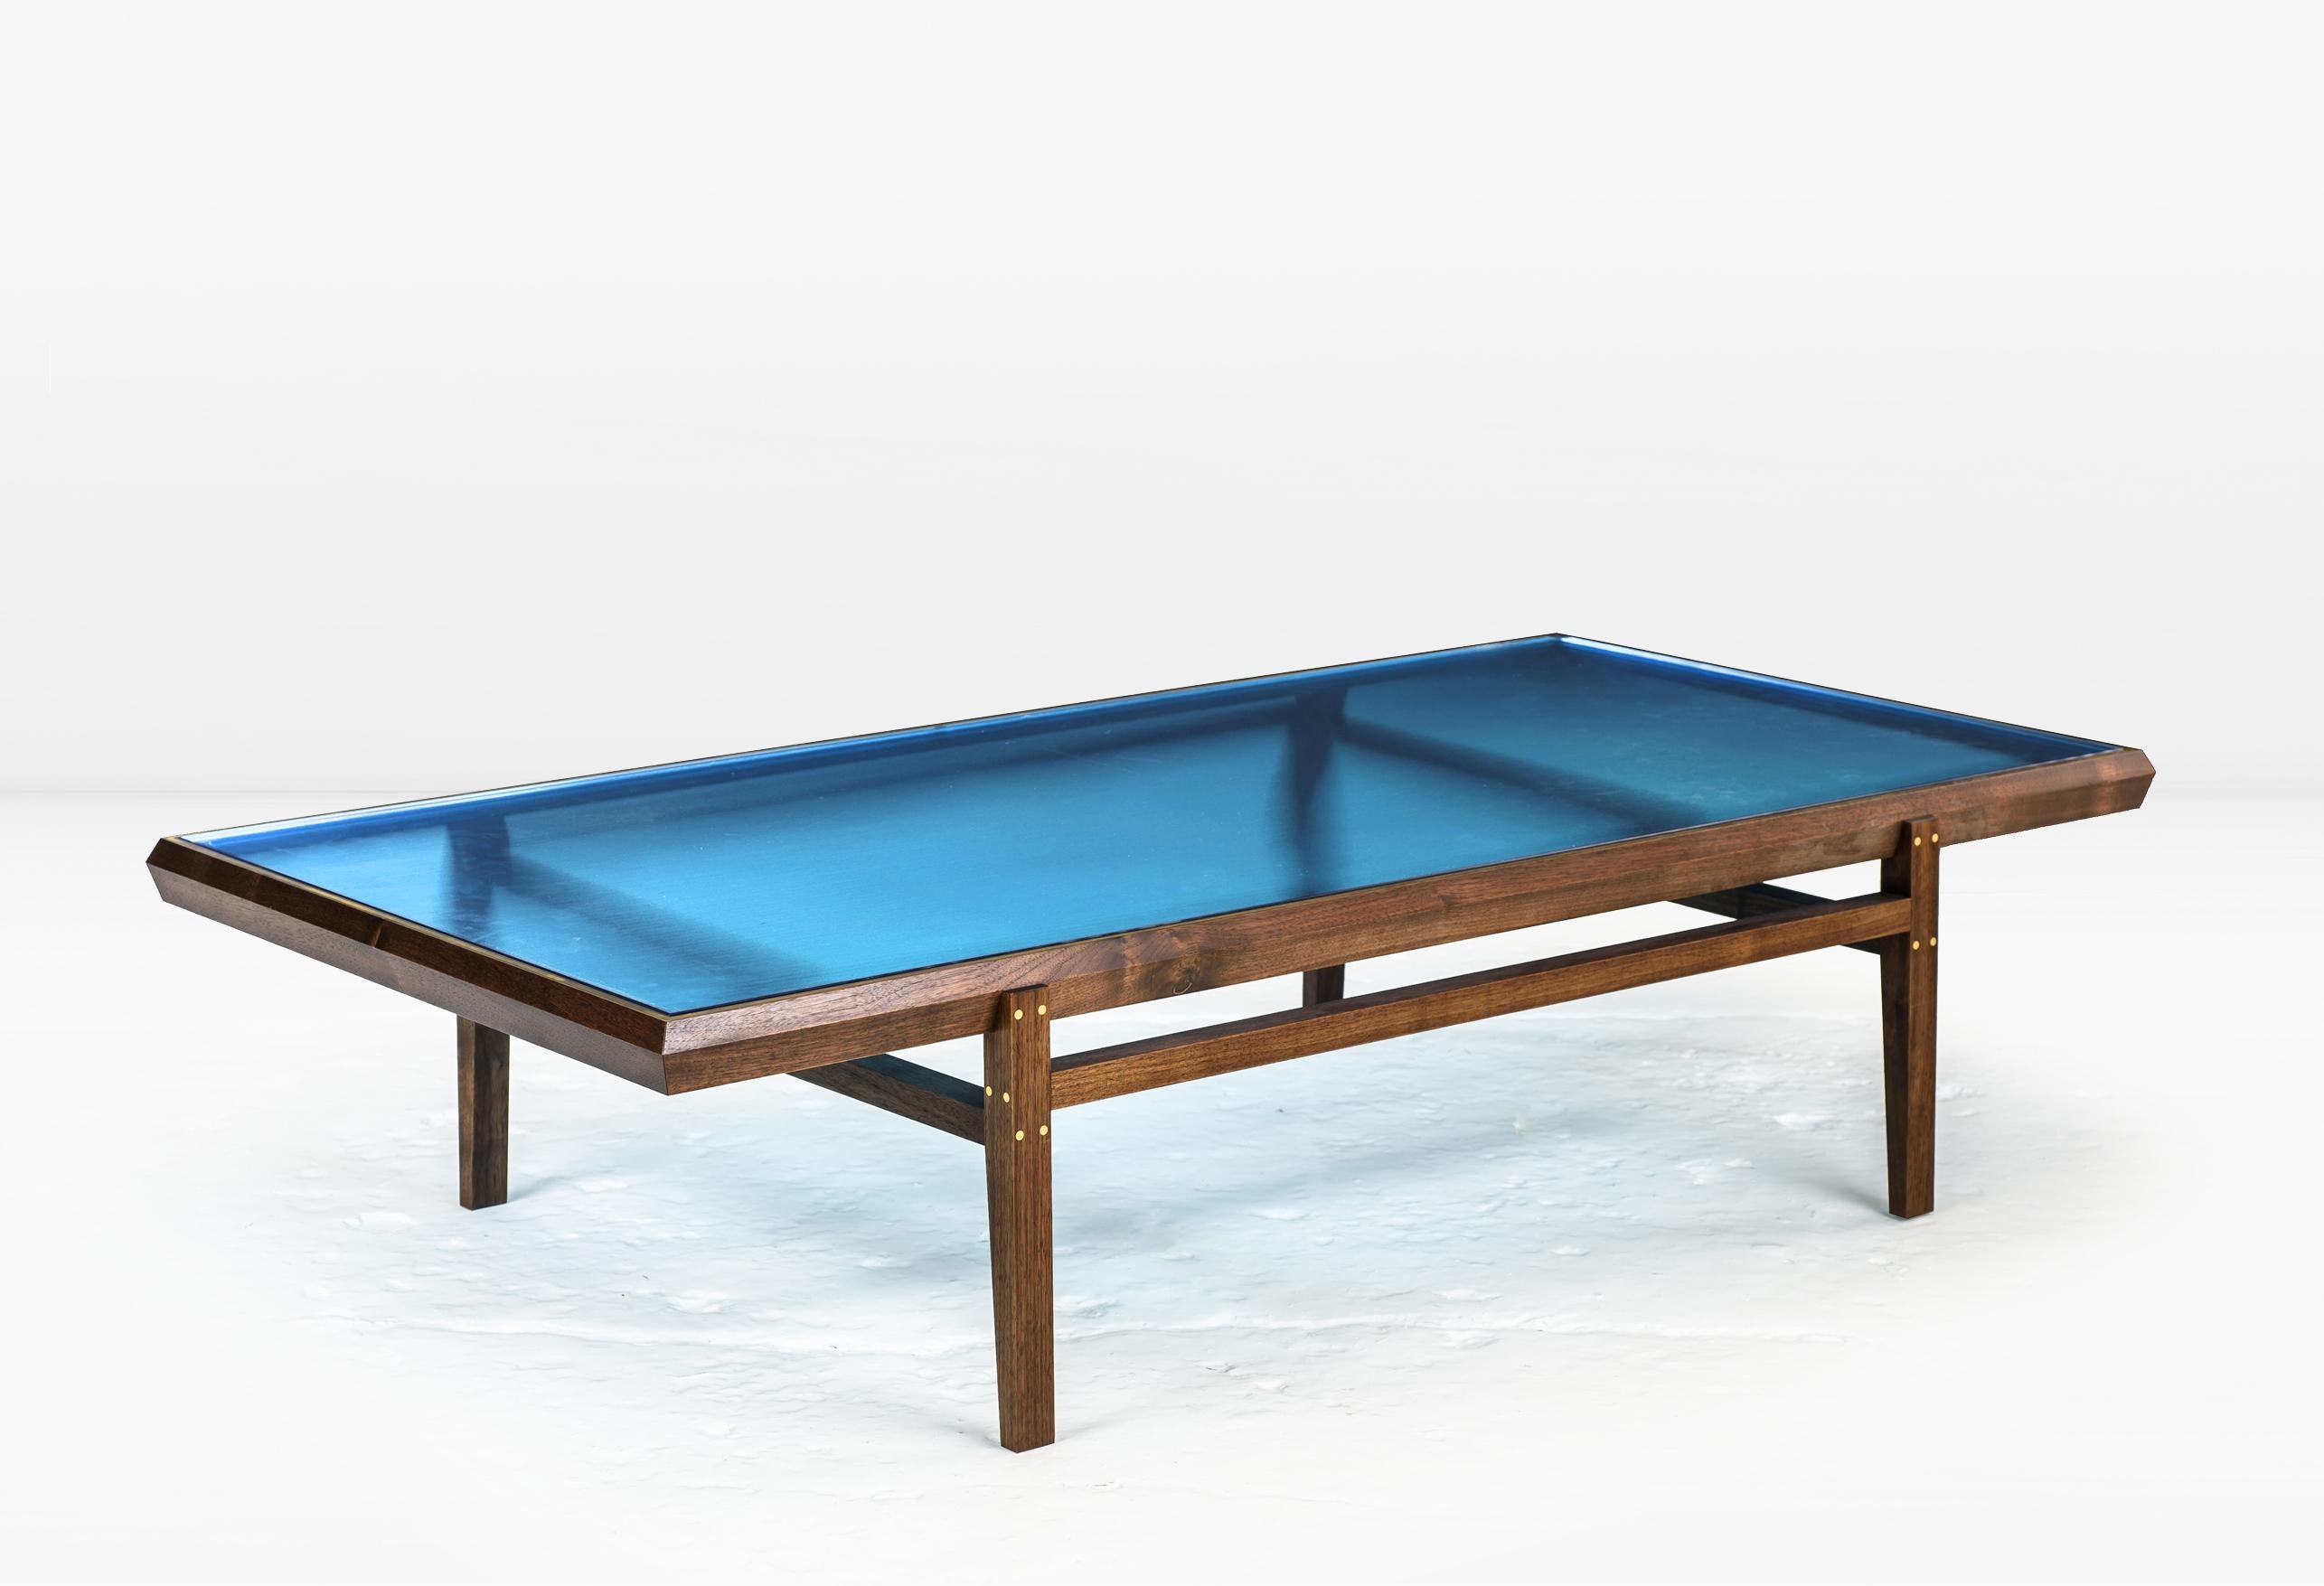 The Pintor Coffee Table’s solid wood frame with Brass inlay is engineered with chamfered edges to provide a simple but worthy setting for the jewel toned, colored glass which forms the tabletop. 

Shown with a solid American Black Walnut frame and